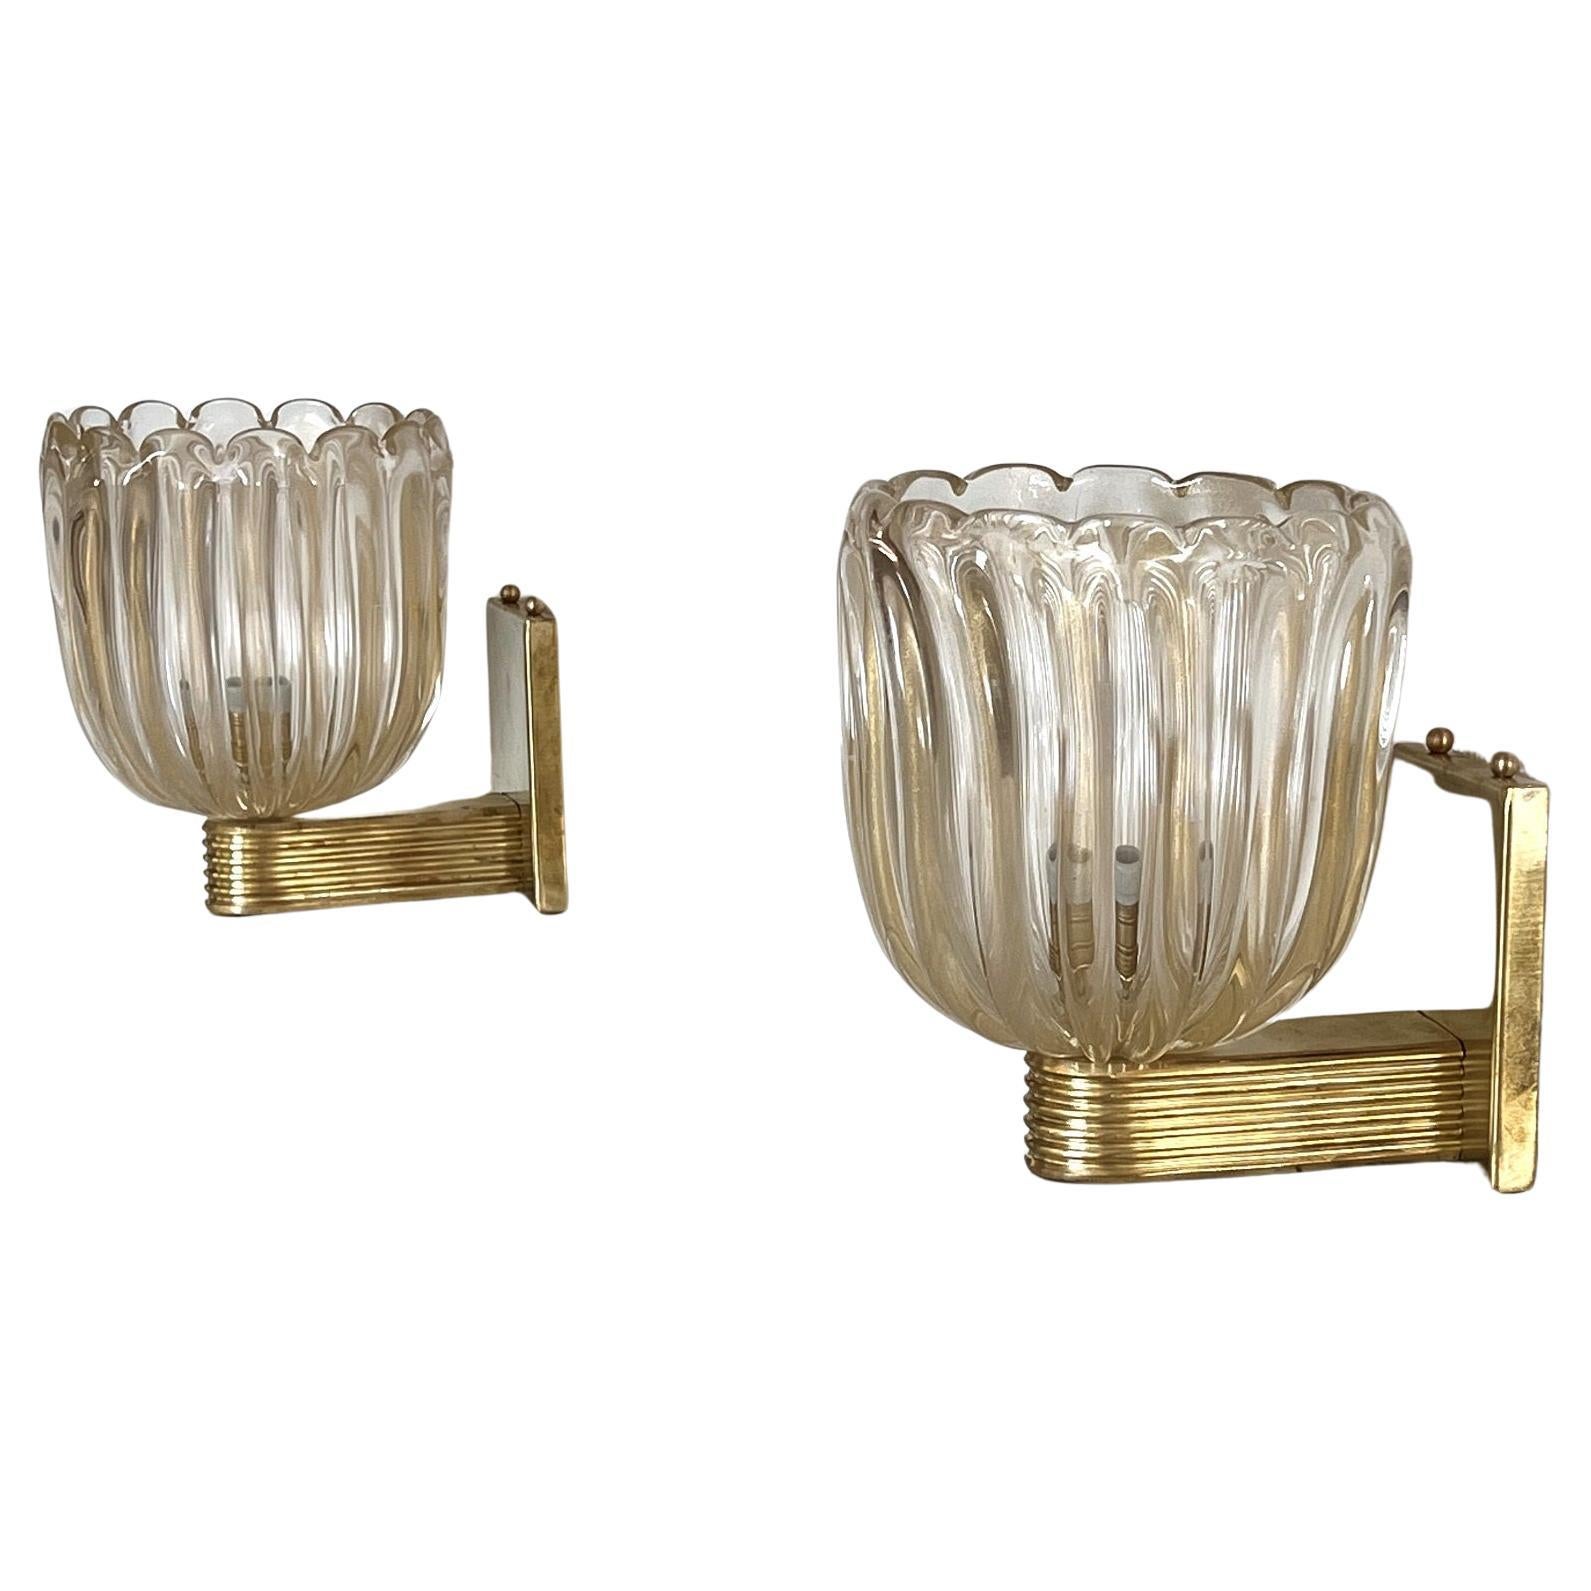 Italian Brass and Murano Glass Wall Lights or Sconces in Art Deco Style, 1990s